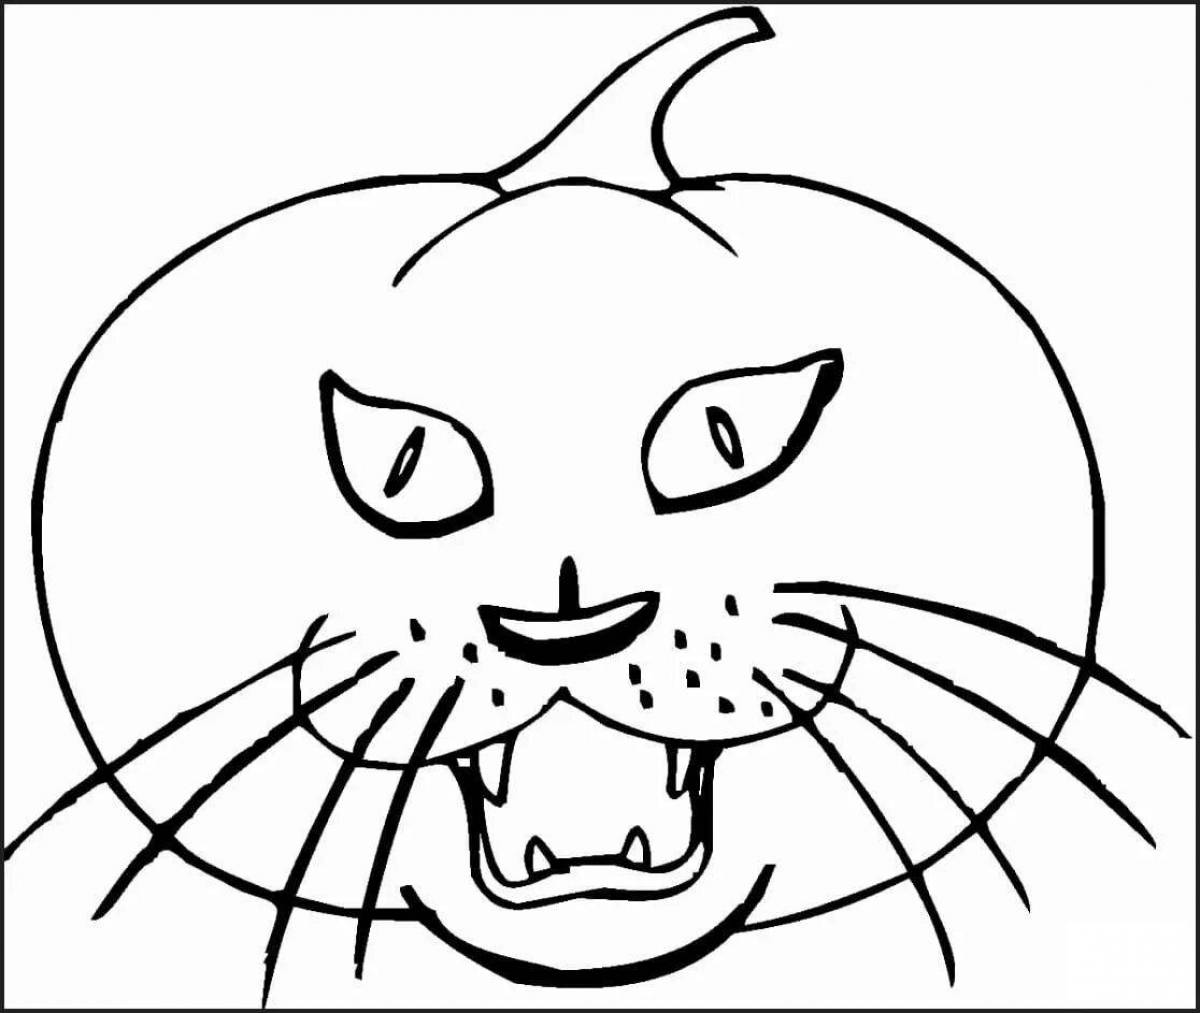 Coloring book neglectful angry cat